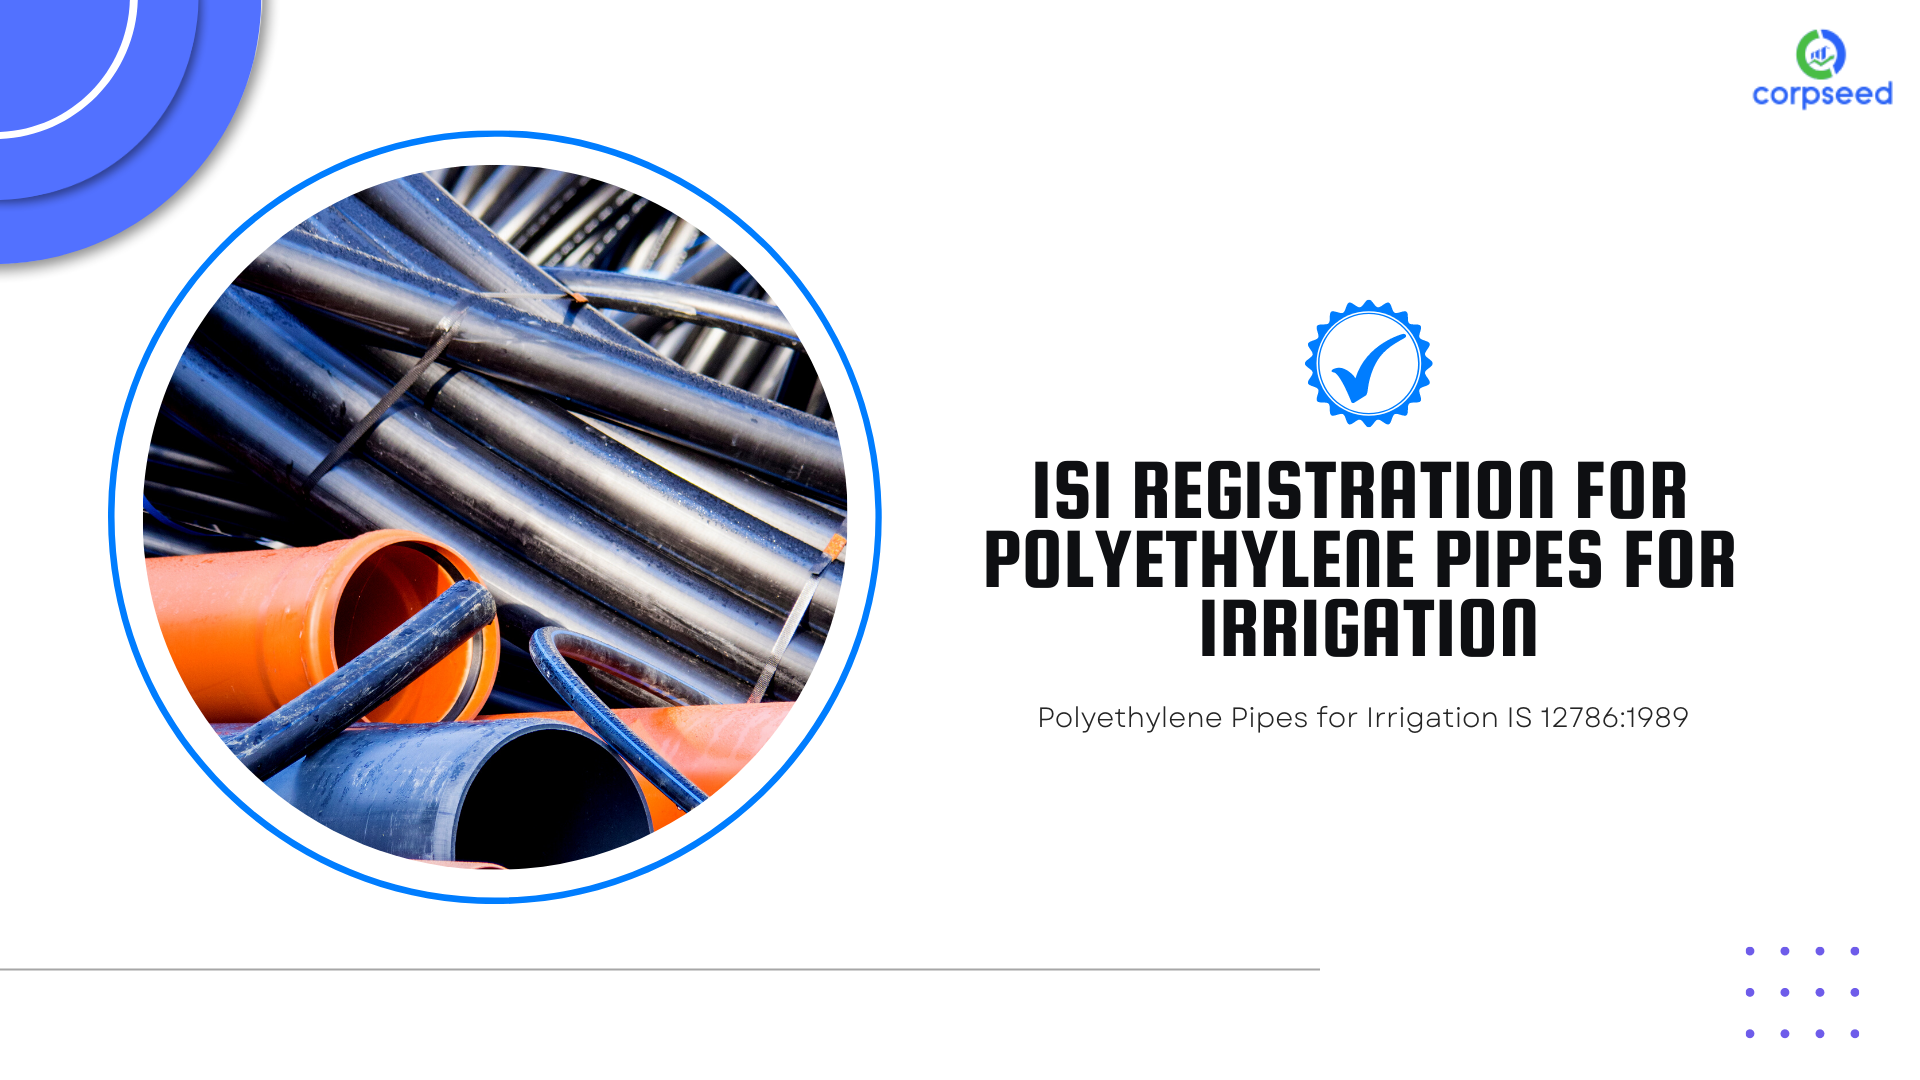 isi-registration-for-polyethylene-pipe-for-irrigation-is-12786-1989_corpseed.png